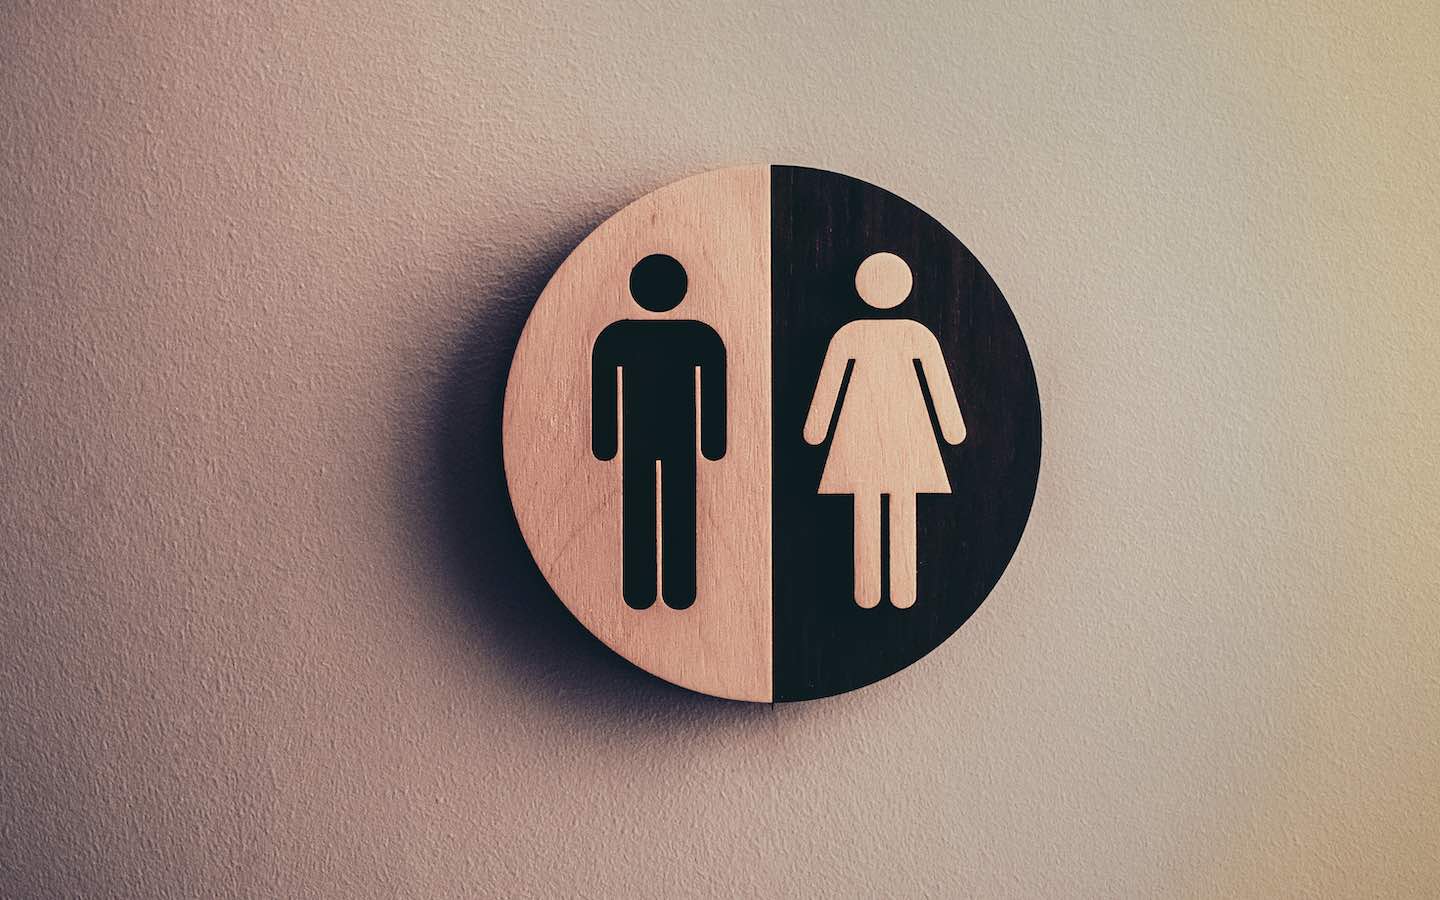 Does the gender-equality paradox actually exist?